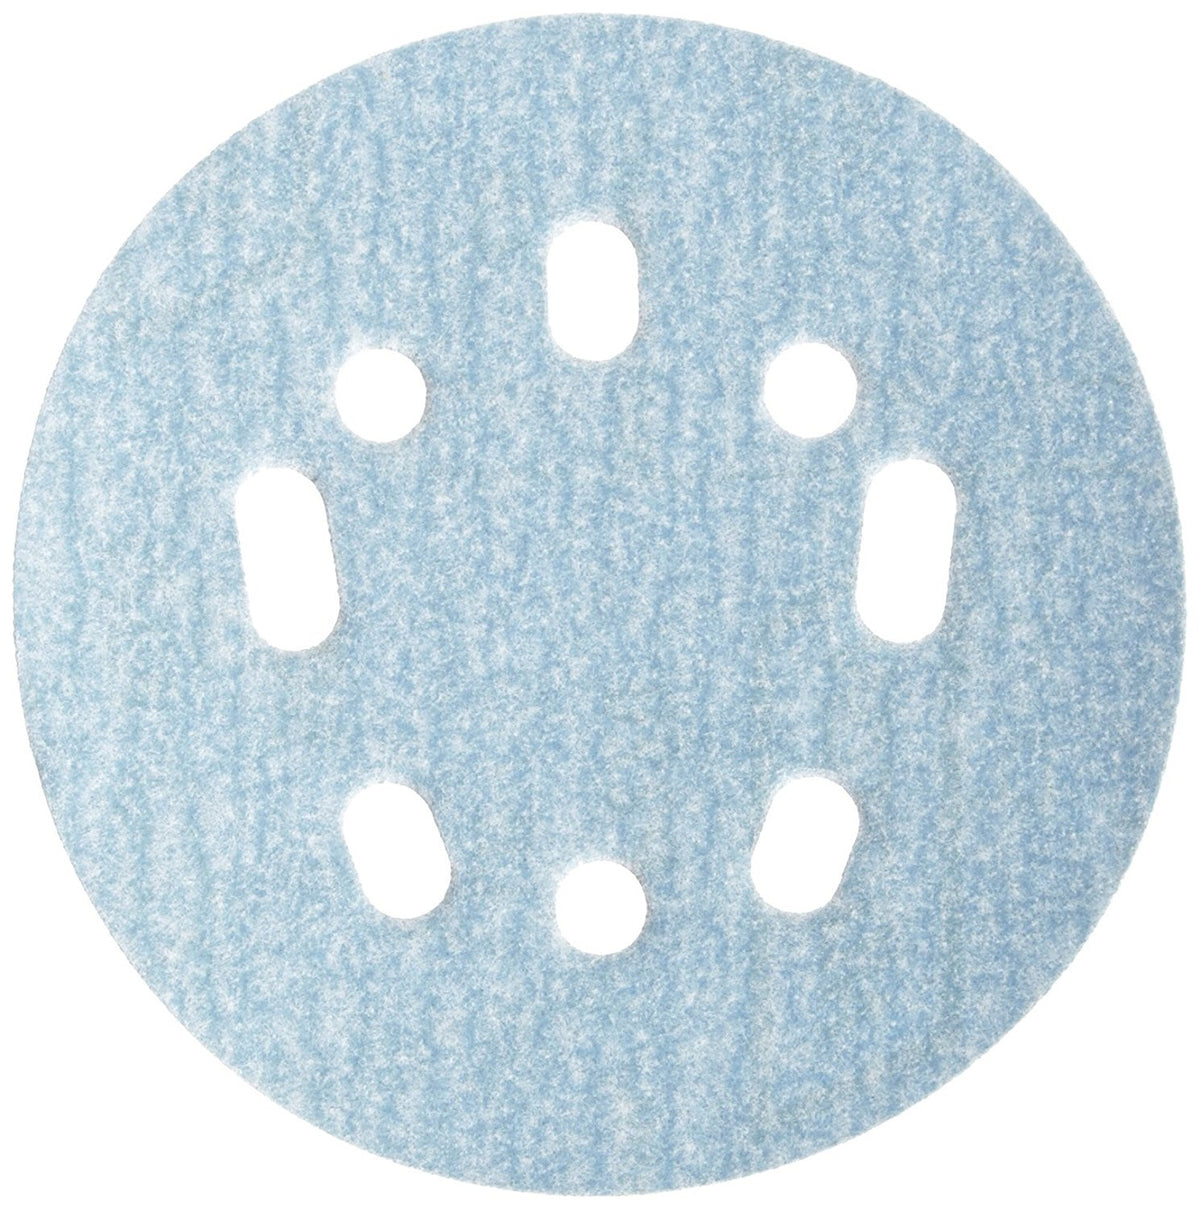 buy sanding discs at cheap rate in bulk. wholesale & retail hand tool supplies store. home décor ideas, maintenance, repair replacement parts